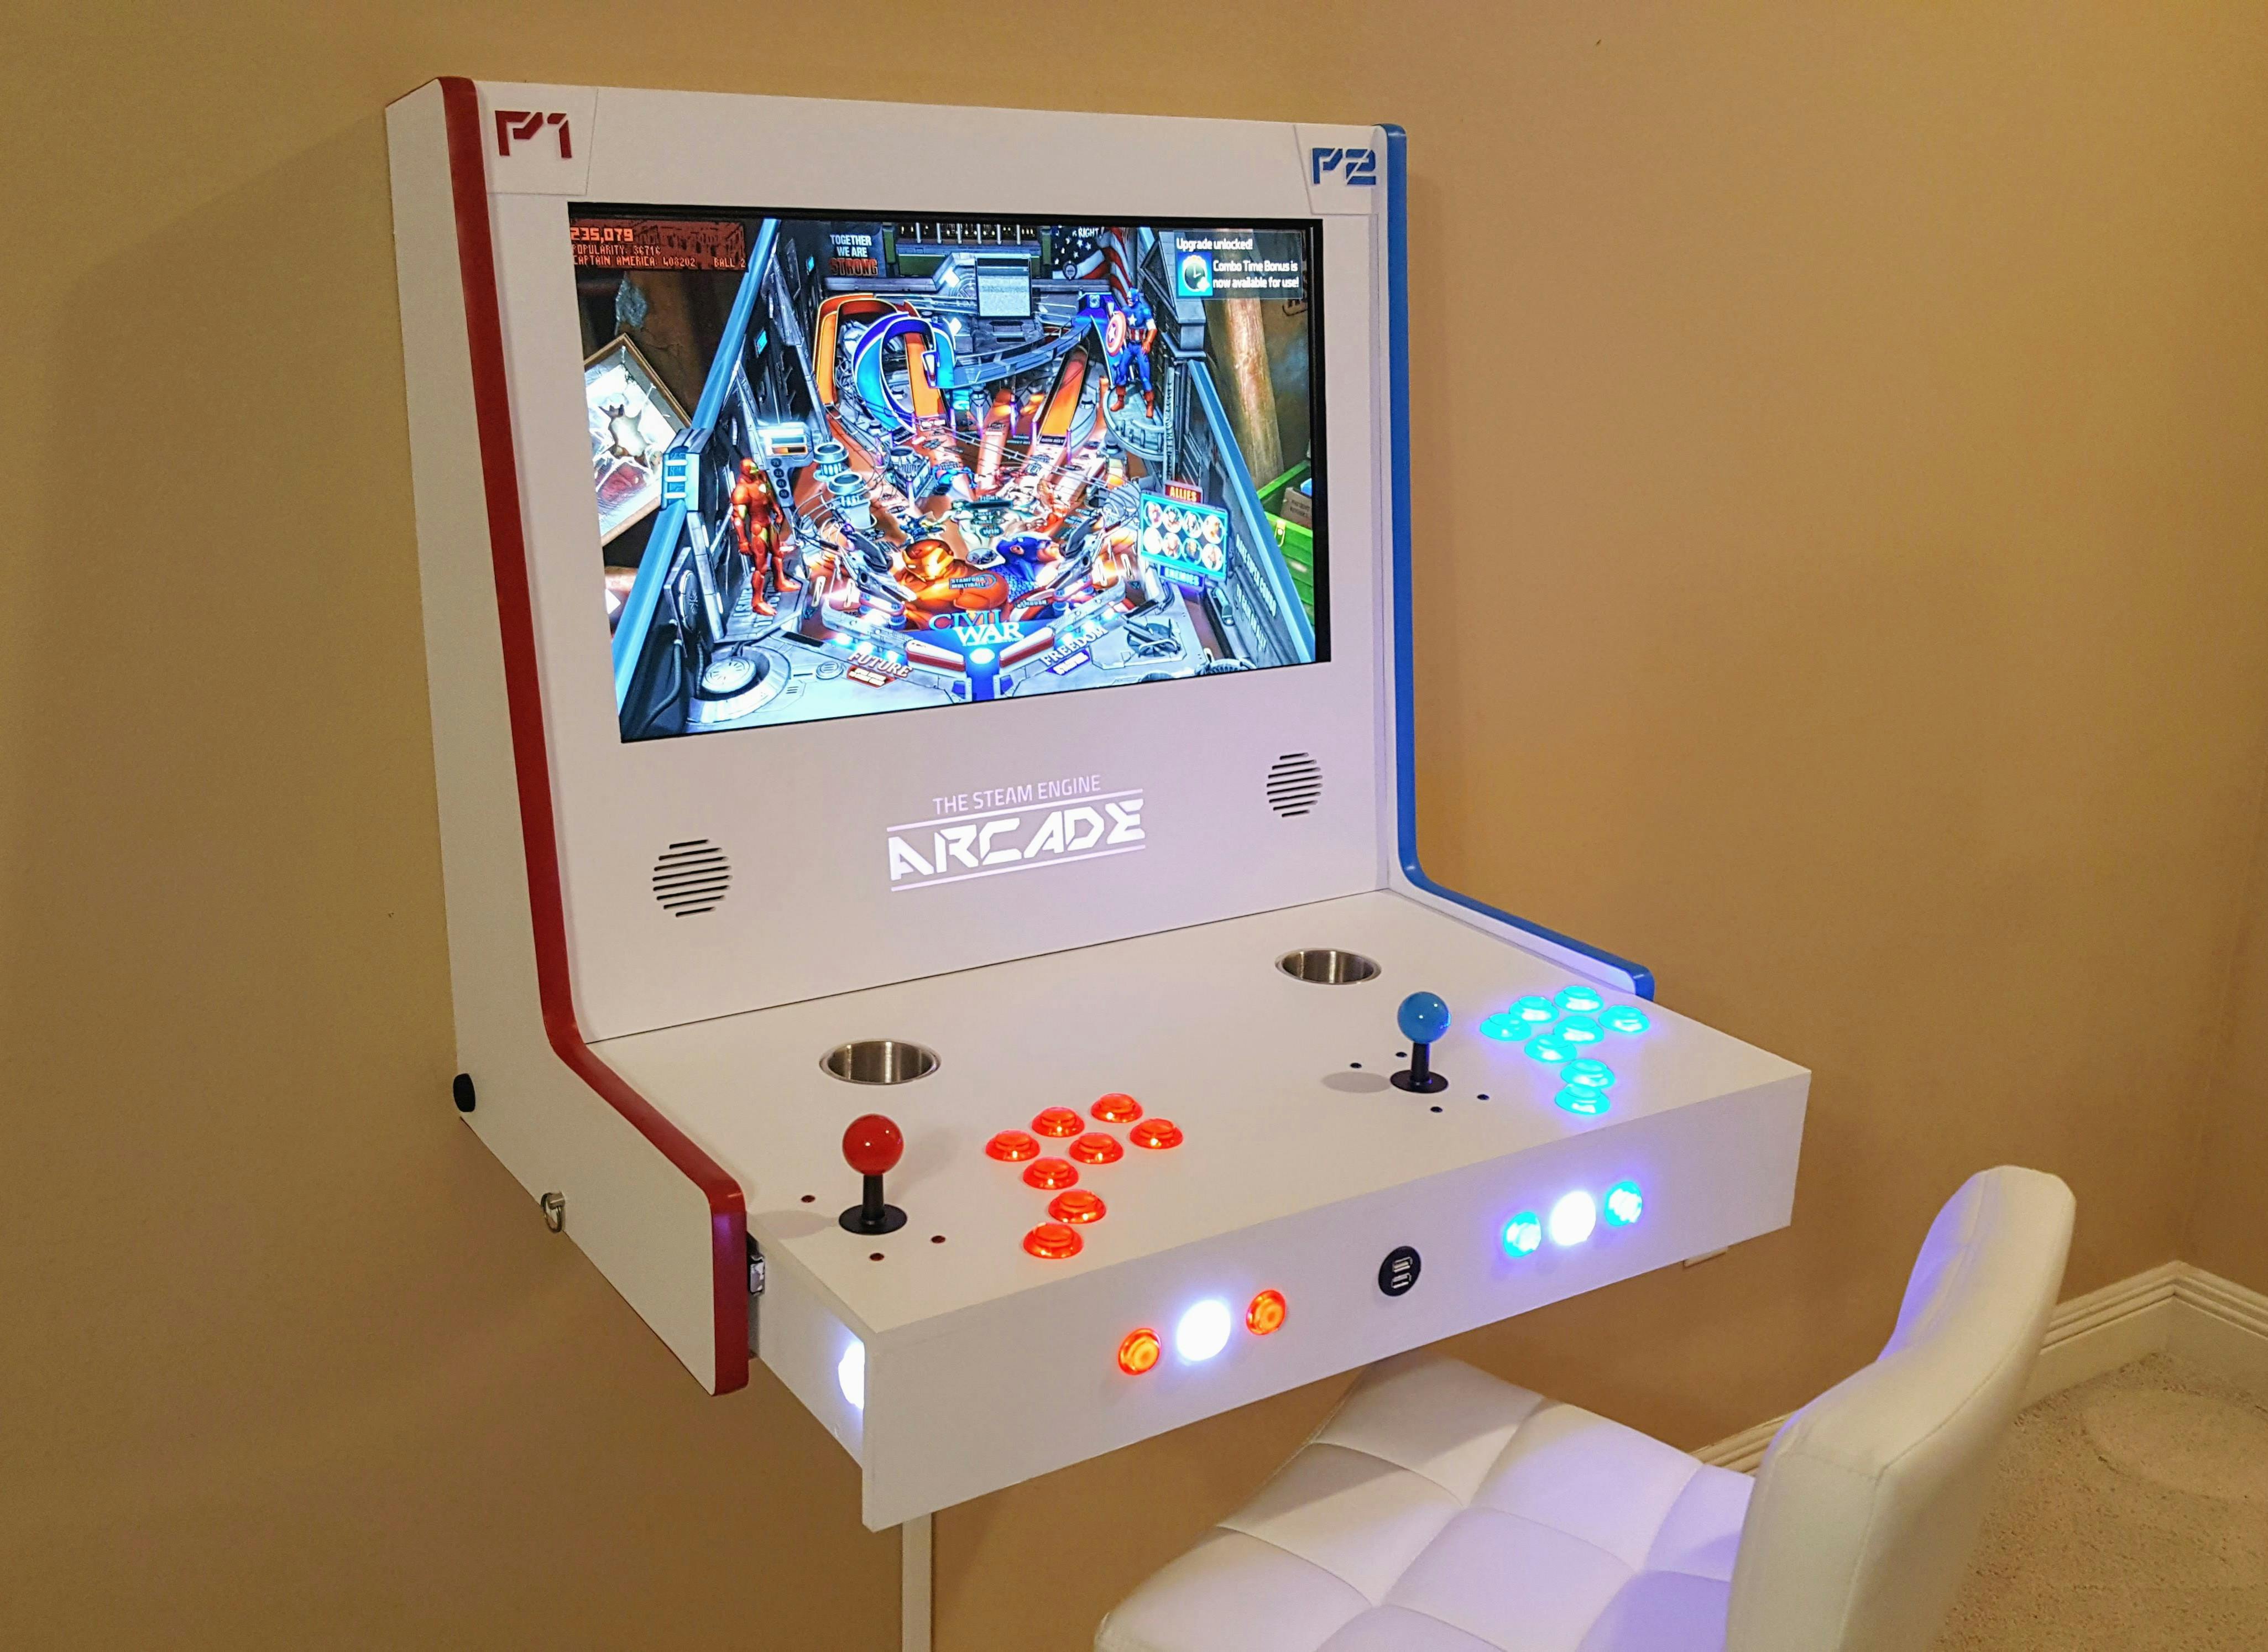 Check Out This Gorgeous Steam Link Based Arcade Cabinet Hackster Io